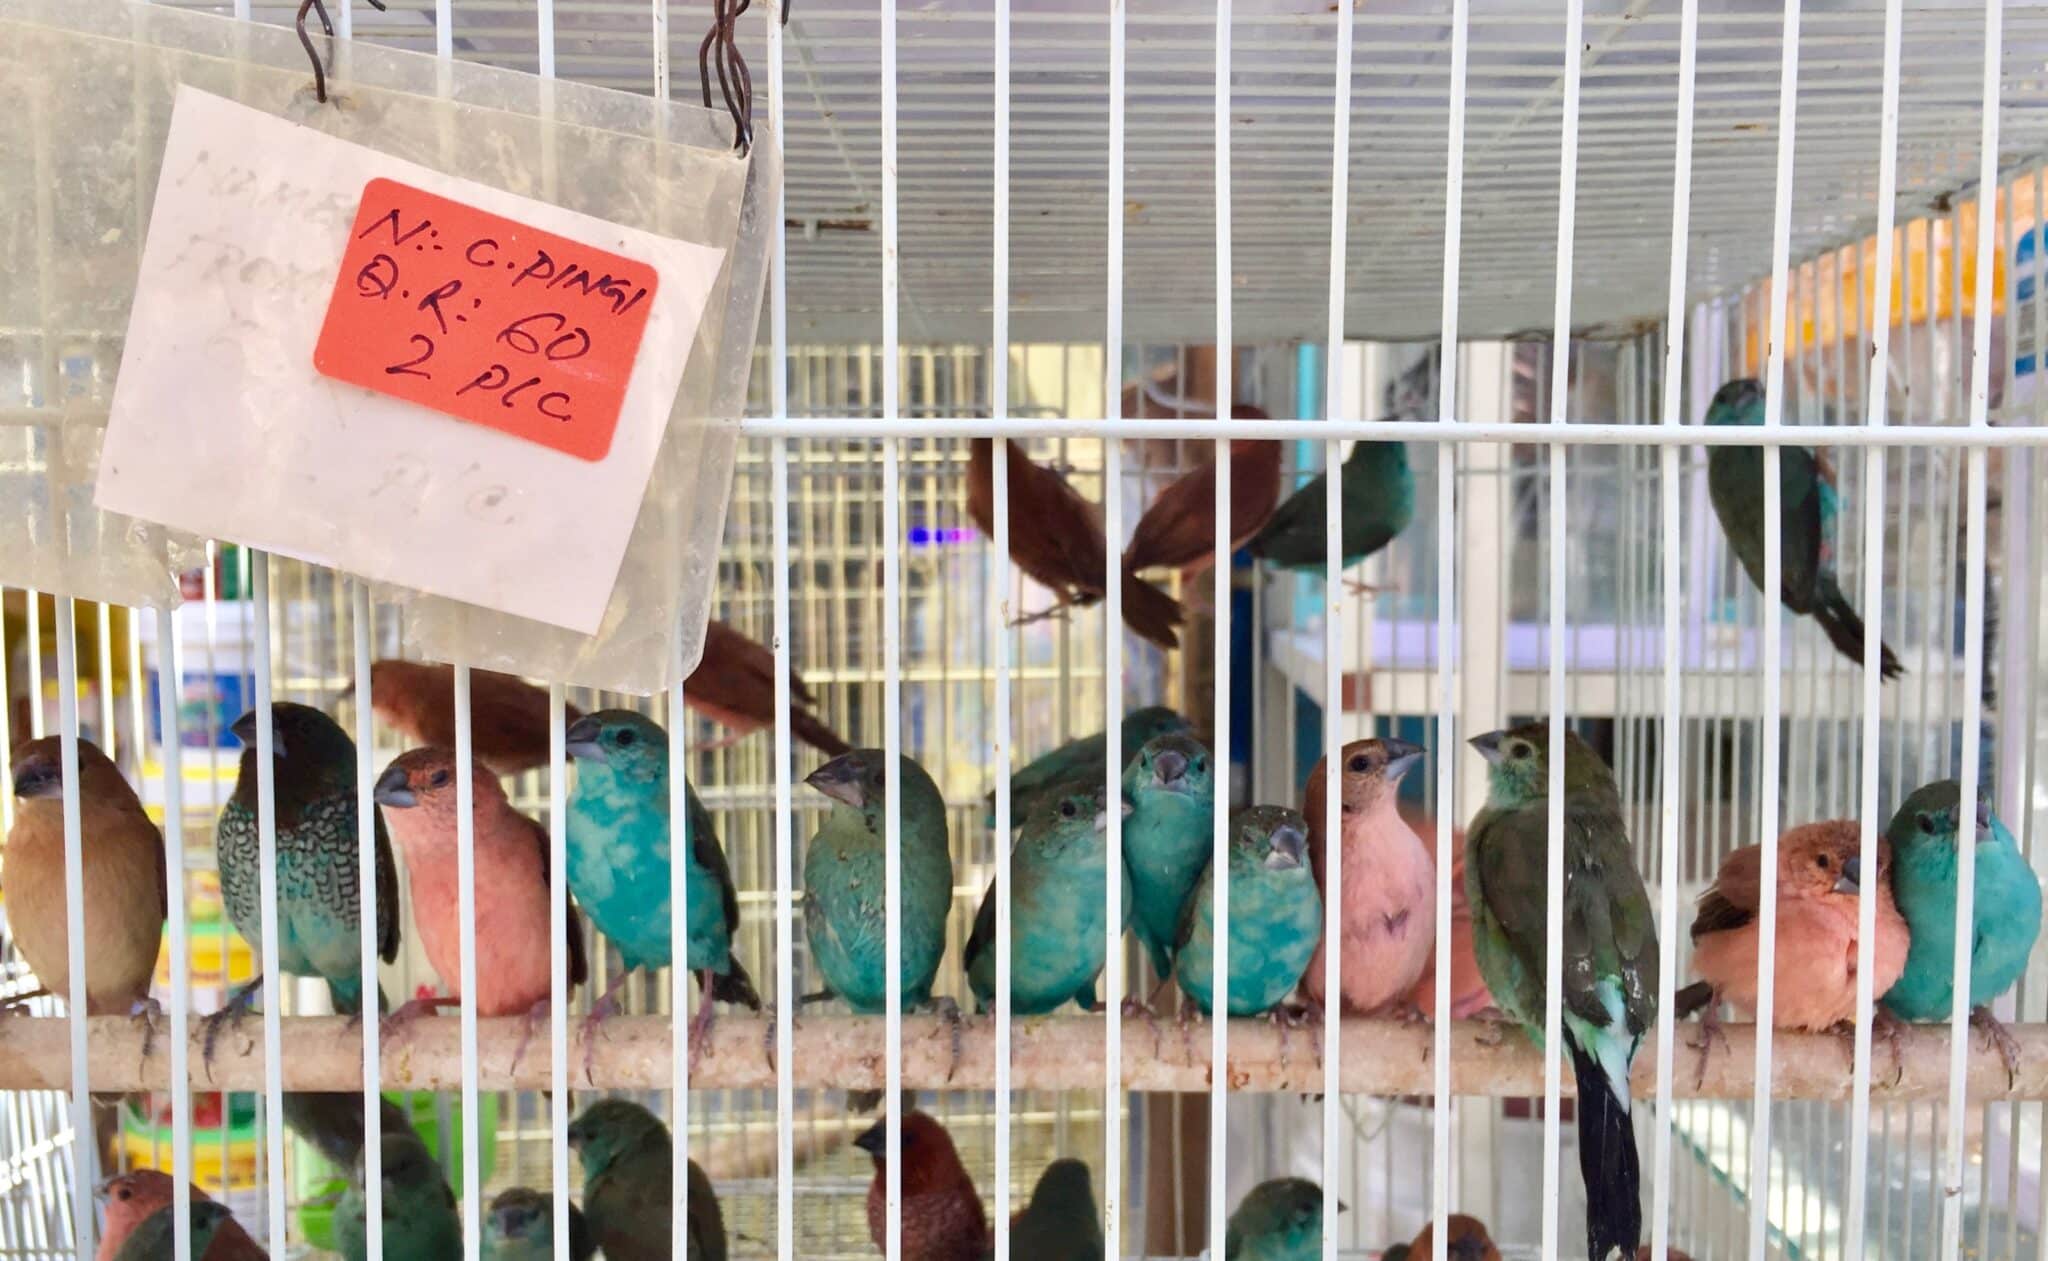 Birds for sale at Souq Waqif